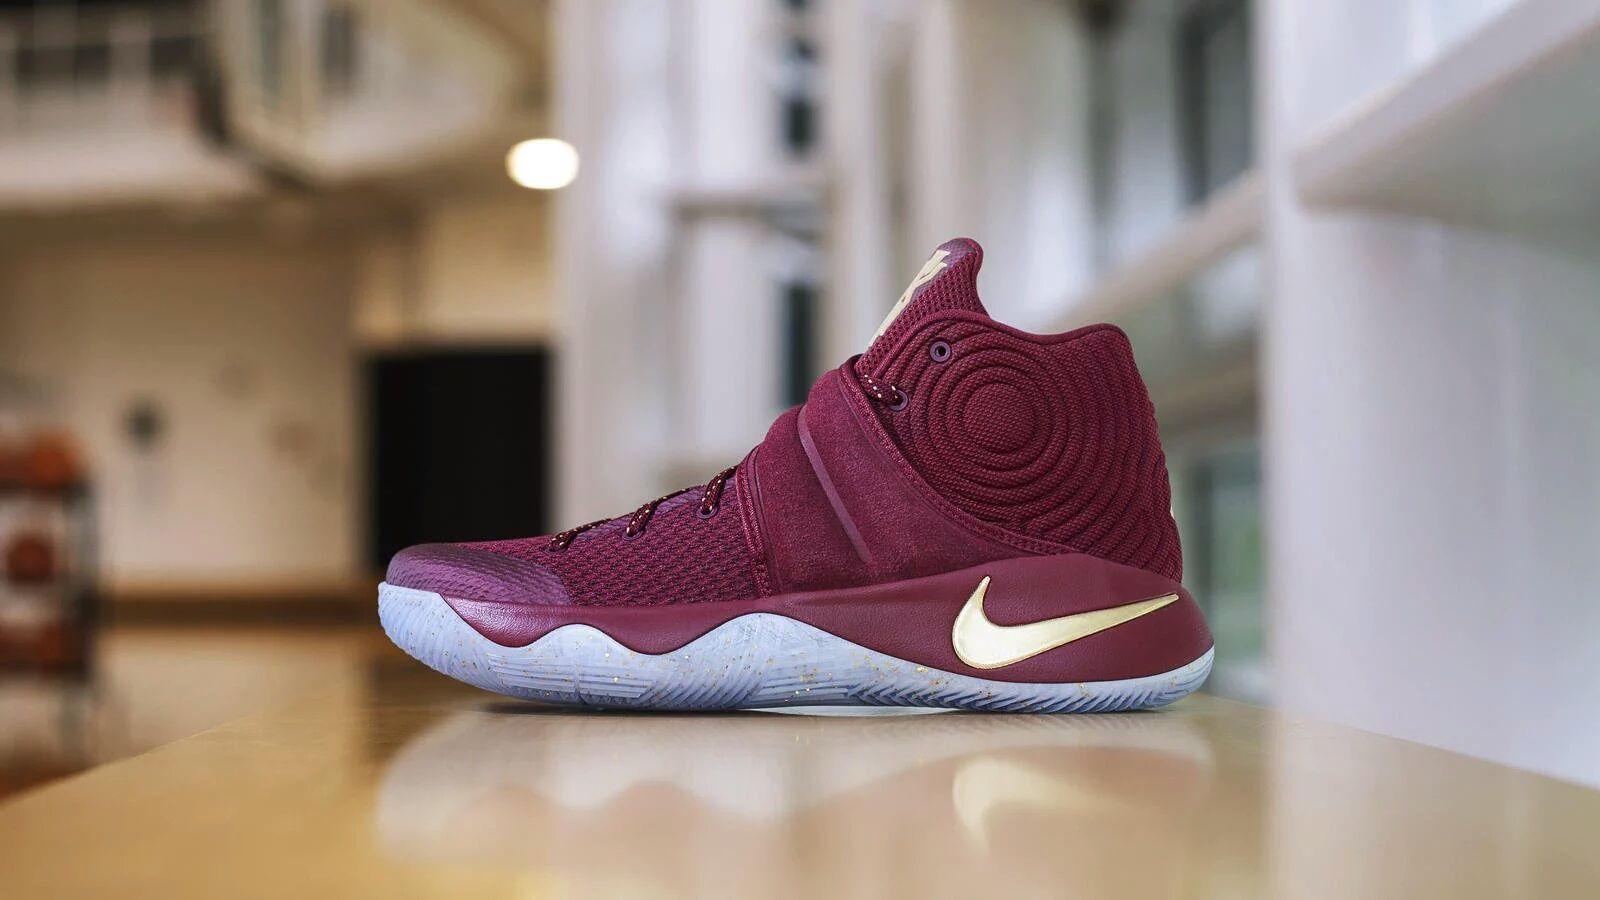 kyrie irving shoes maroon